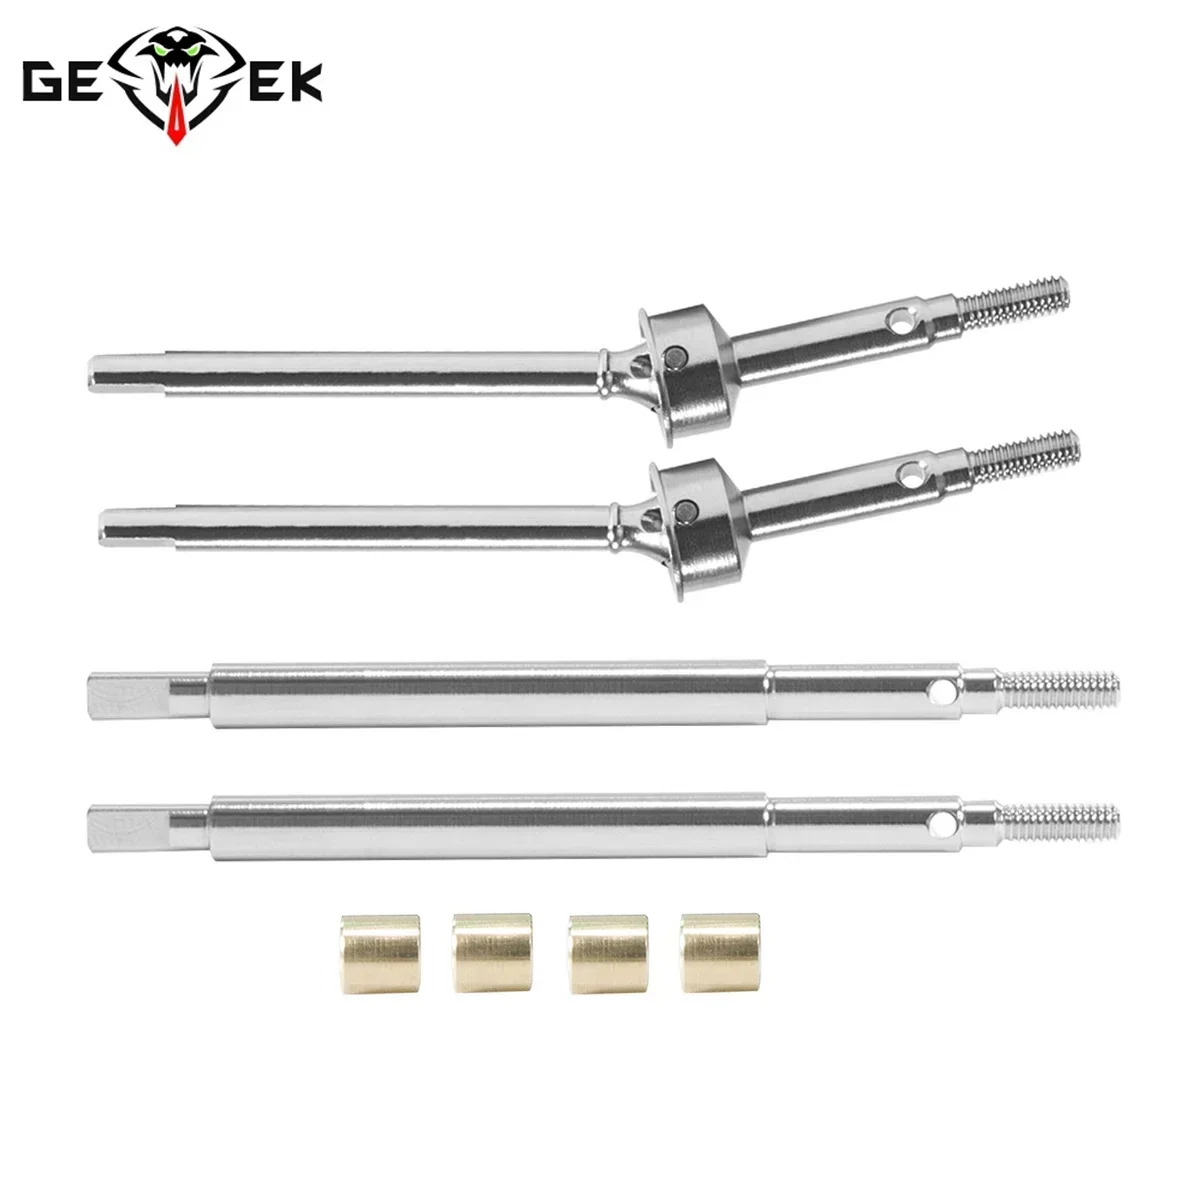 

Steel Front Rear Axle Shafts 5mm Extended +2mm Thread Longer Driveshaft for 1/18 RC Crawler Car TRX4M Upgrade Parts